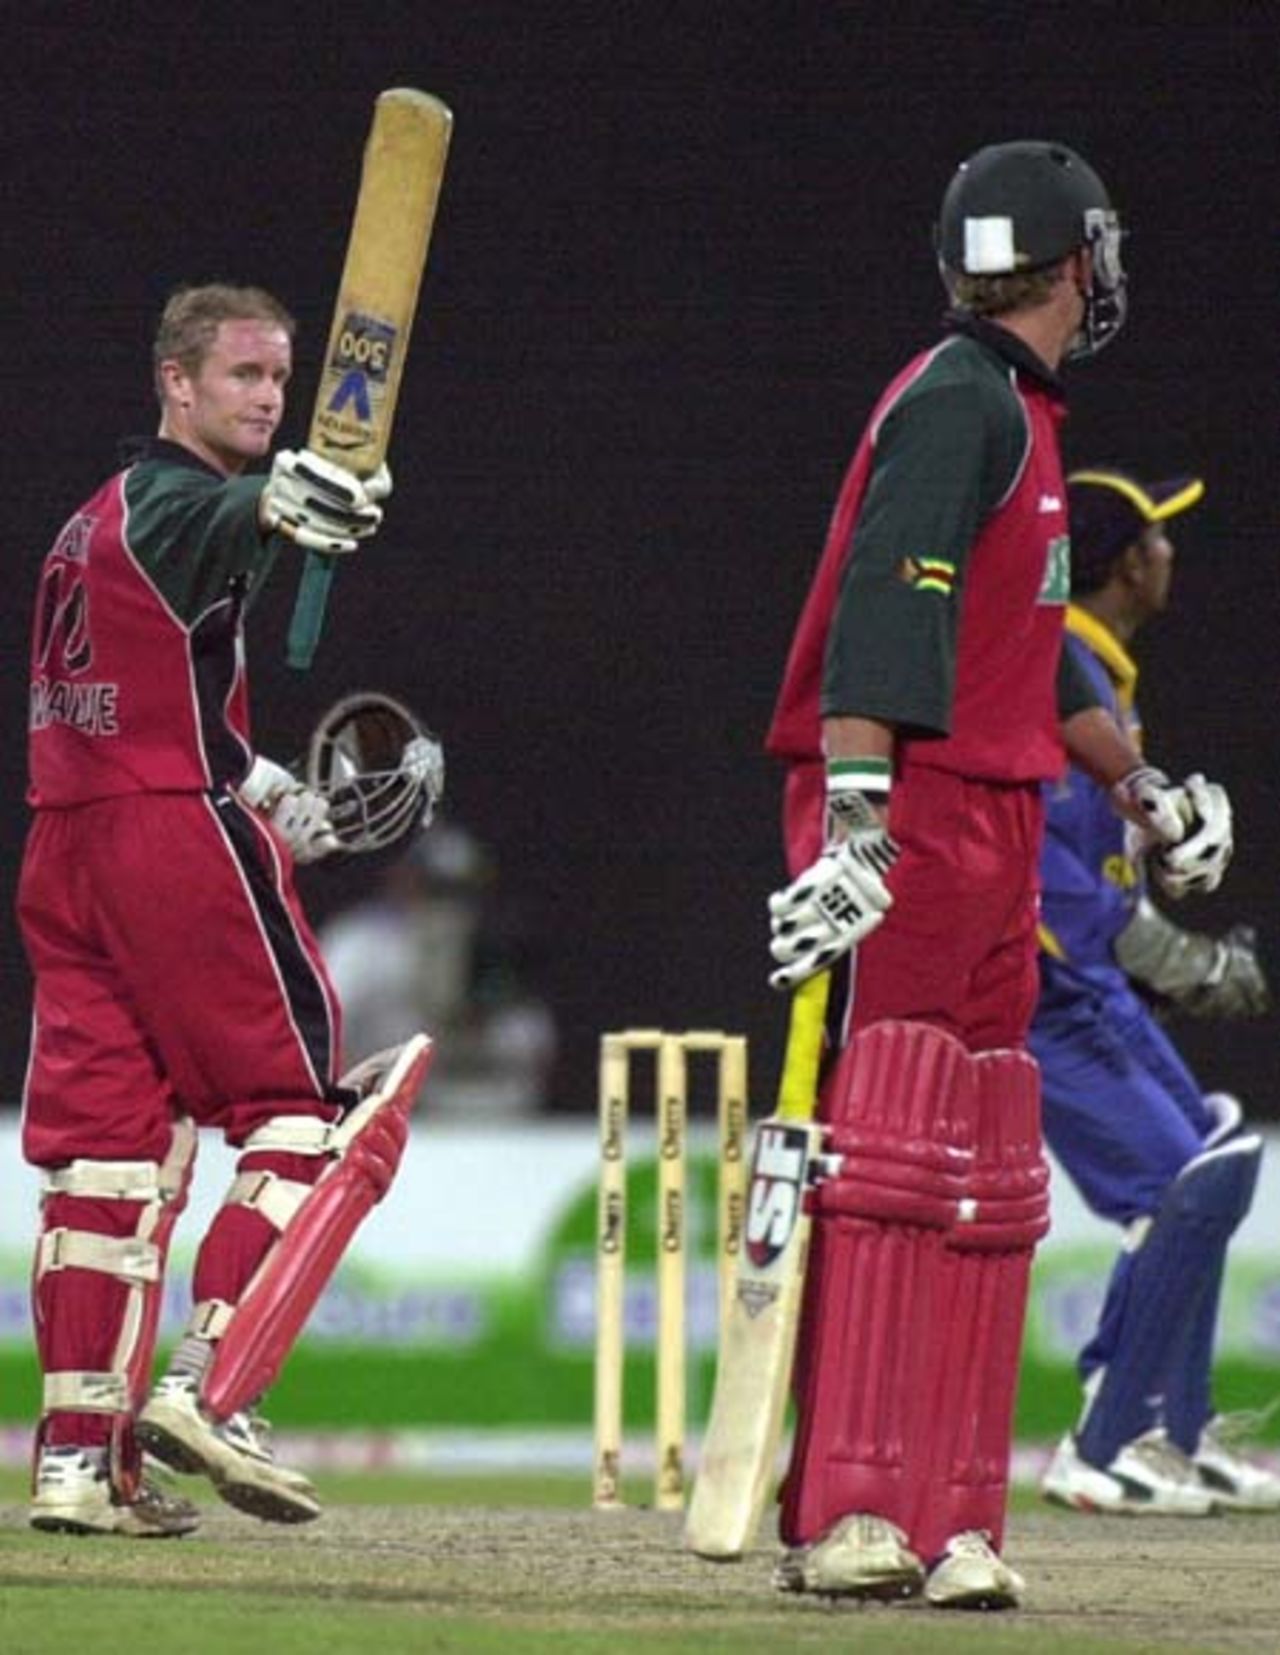 Zimbabwe top scorer Grant Flower (L) acknowledges spectators by waving his bat after decisive half century against Sri Lanka during the fifth one-day match of the Four Nation Sharjah Cricket Tournament, 07 April 2003.